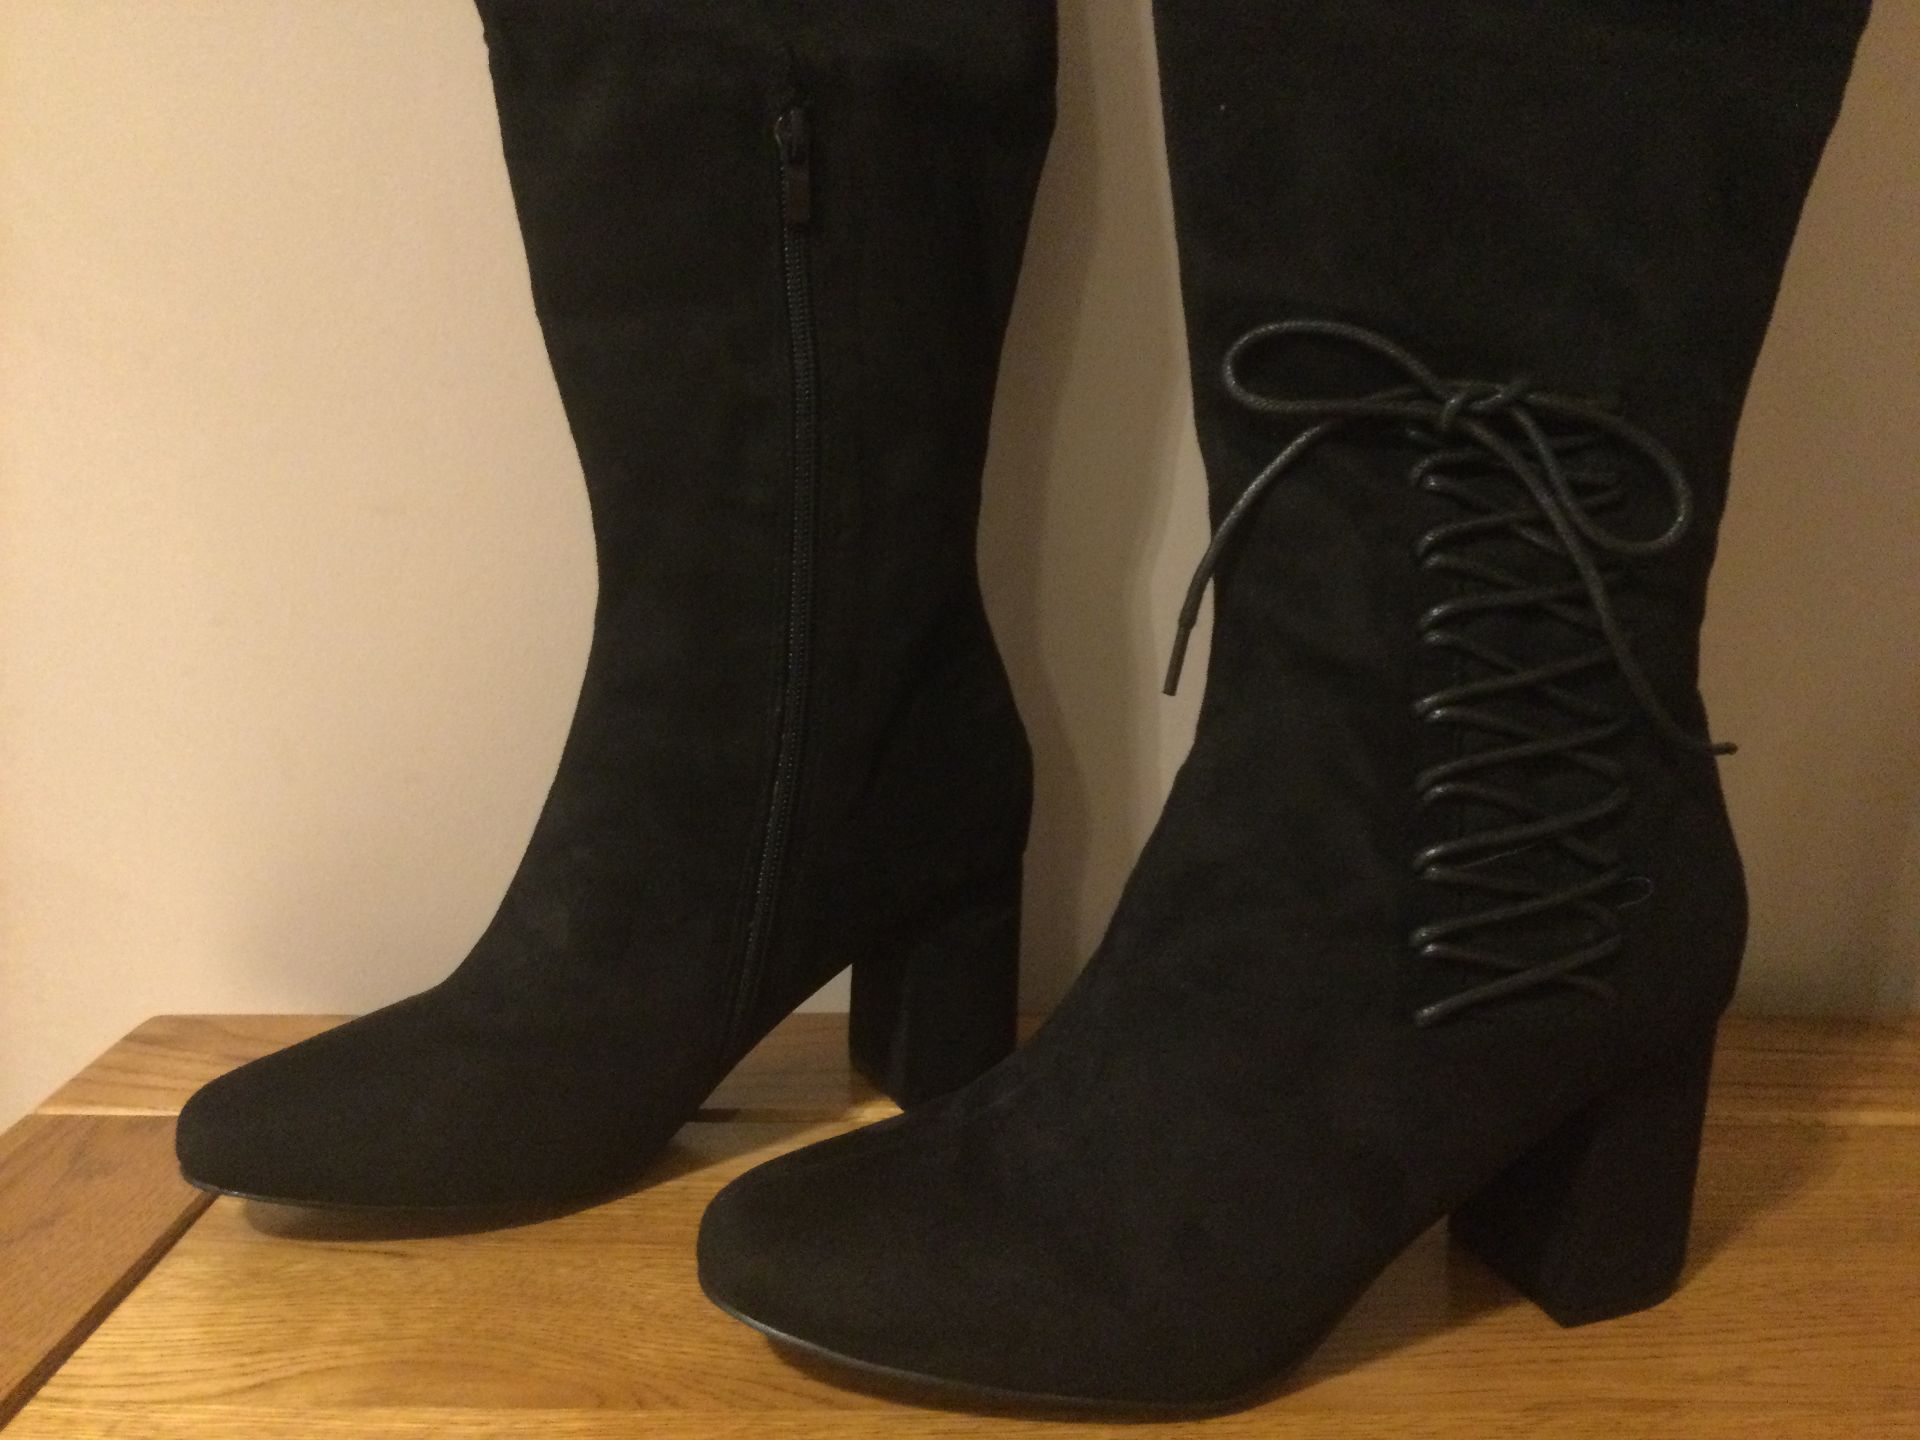 Dolcis “Emma” Long Boots, Block Heel, Size 6, Black - New RRP £55.00 - Image 3 of 7